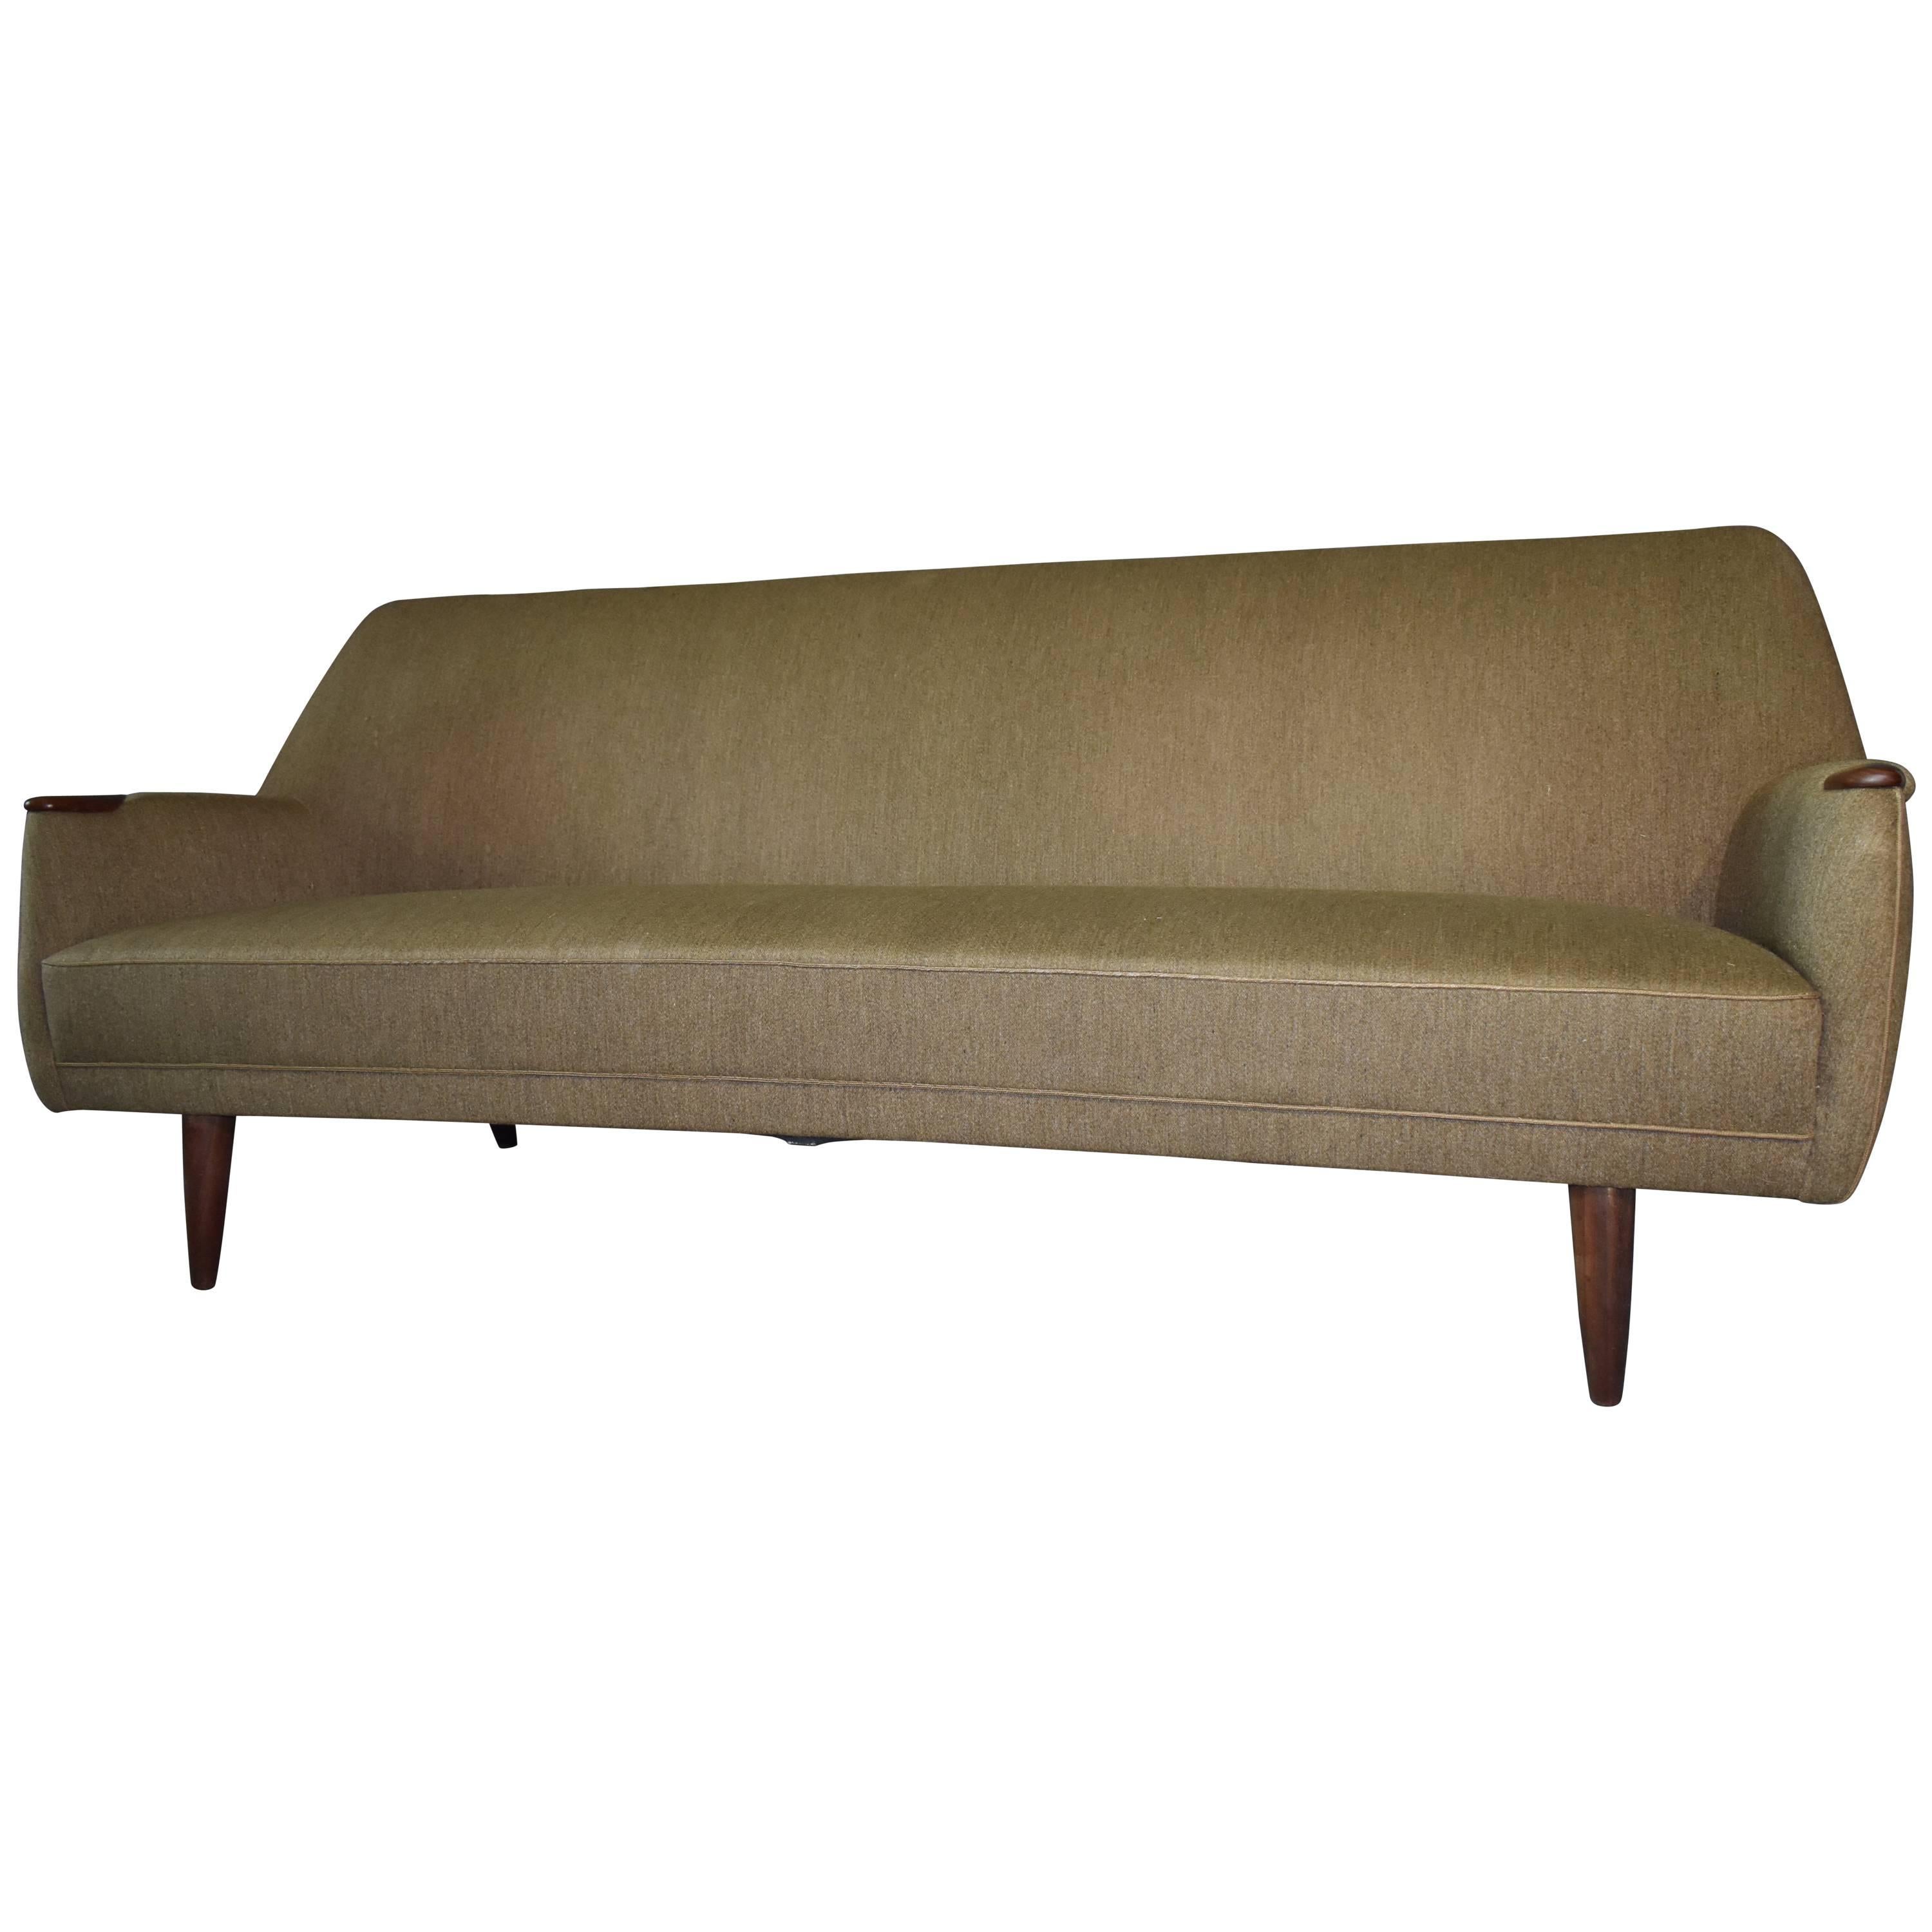 Dusted Green Mid-Century Modern Sofa, Wool and Teak, 1960s For Sale